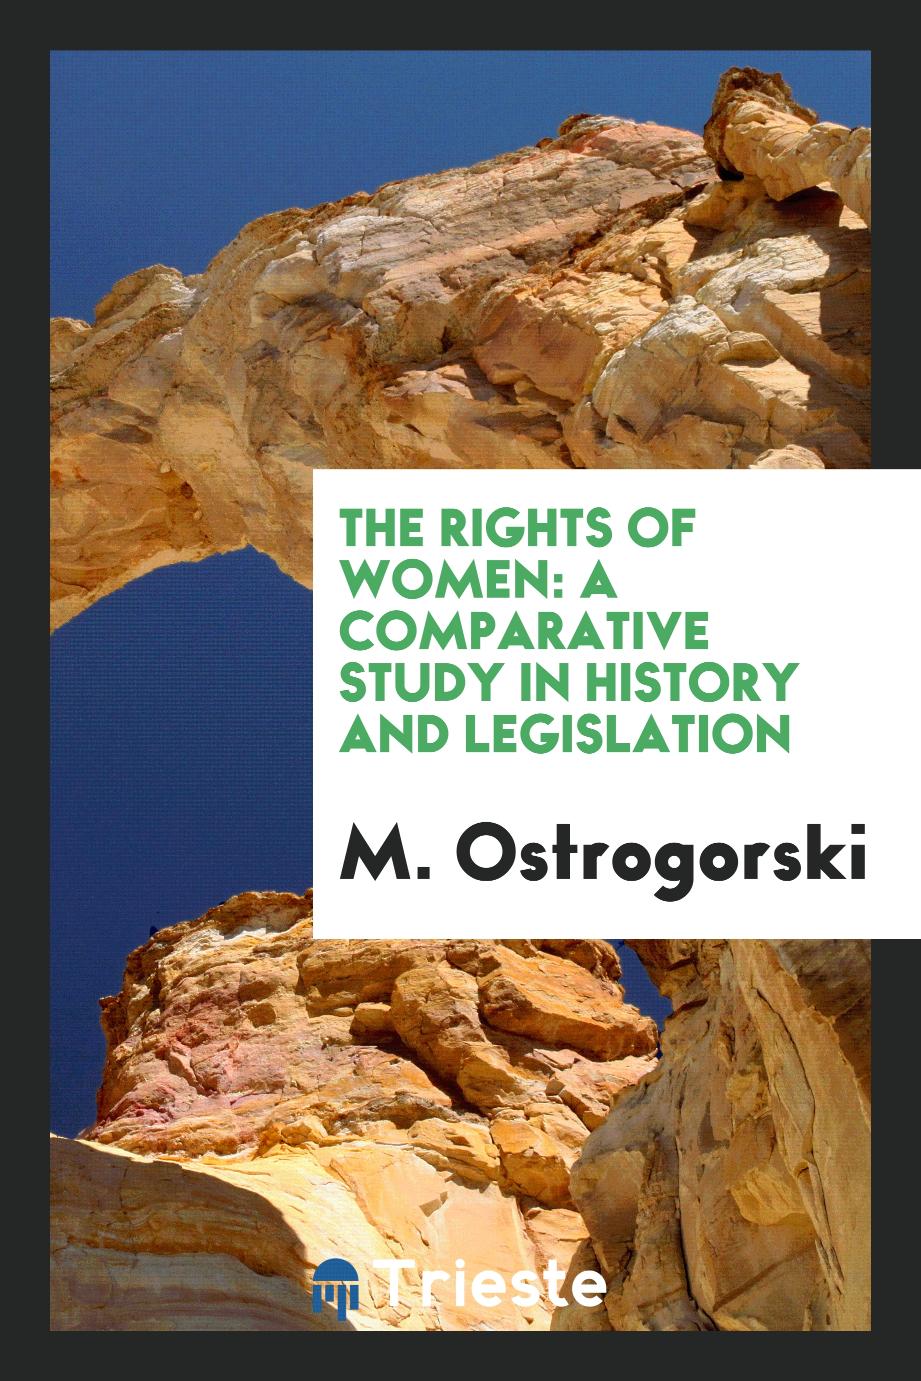 The rights of women: a comparative study in history and legislation